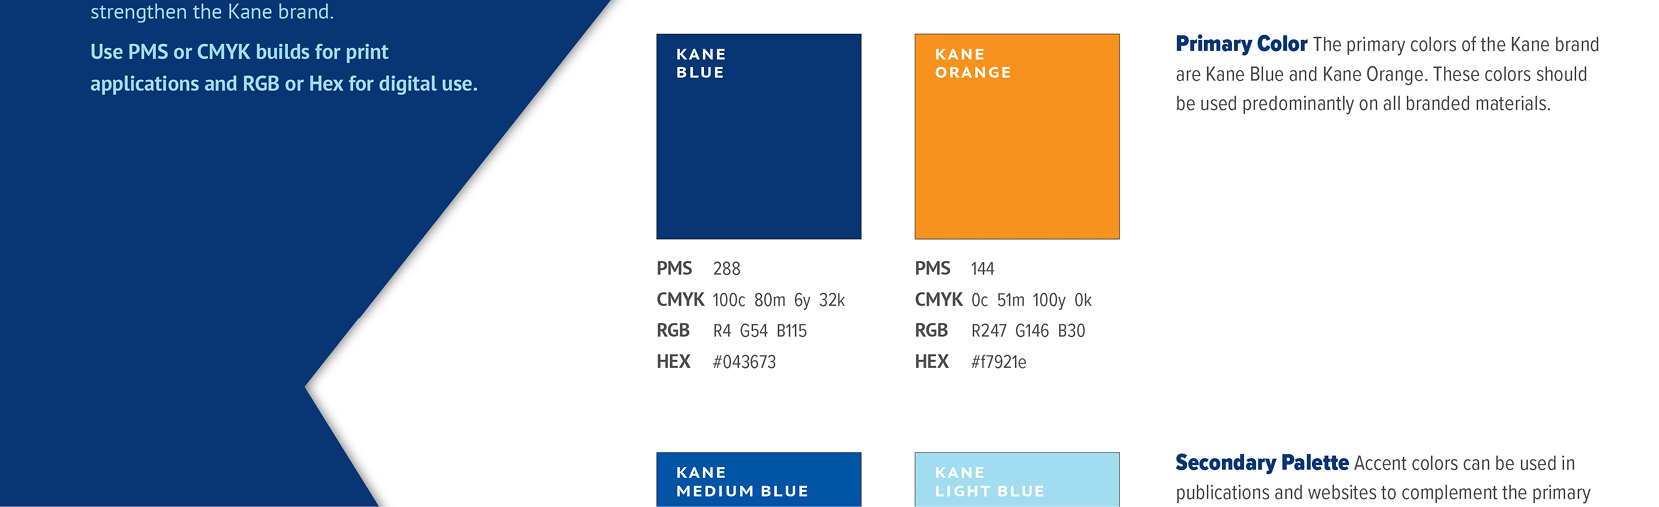 Kane Brand colors and guidelines